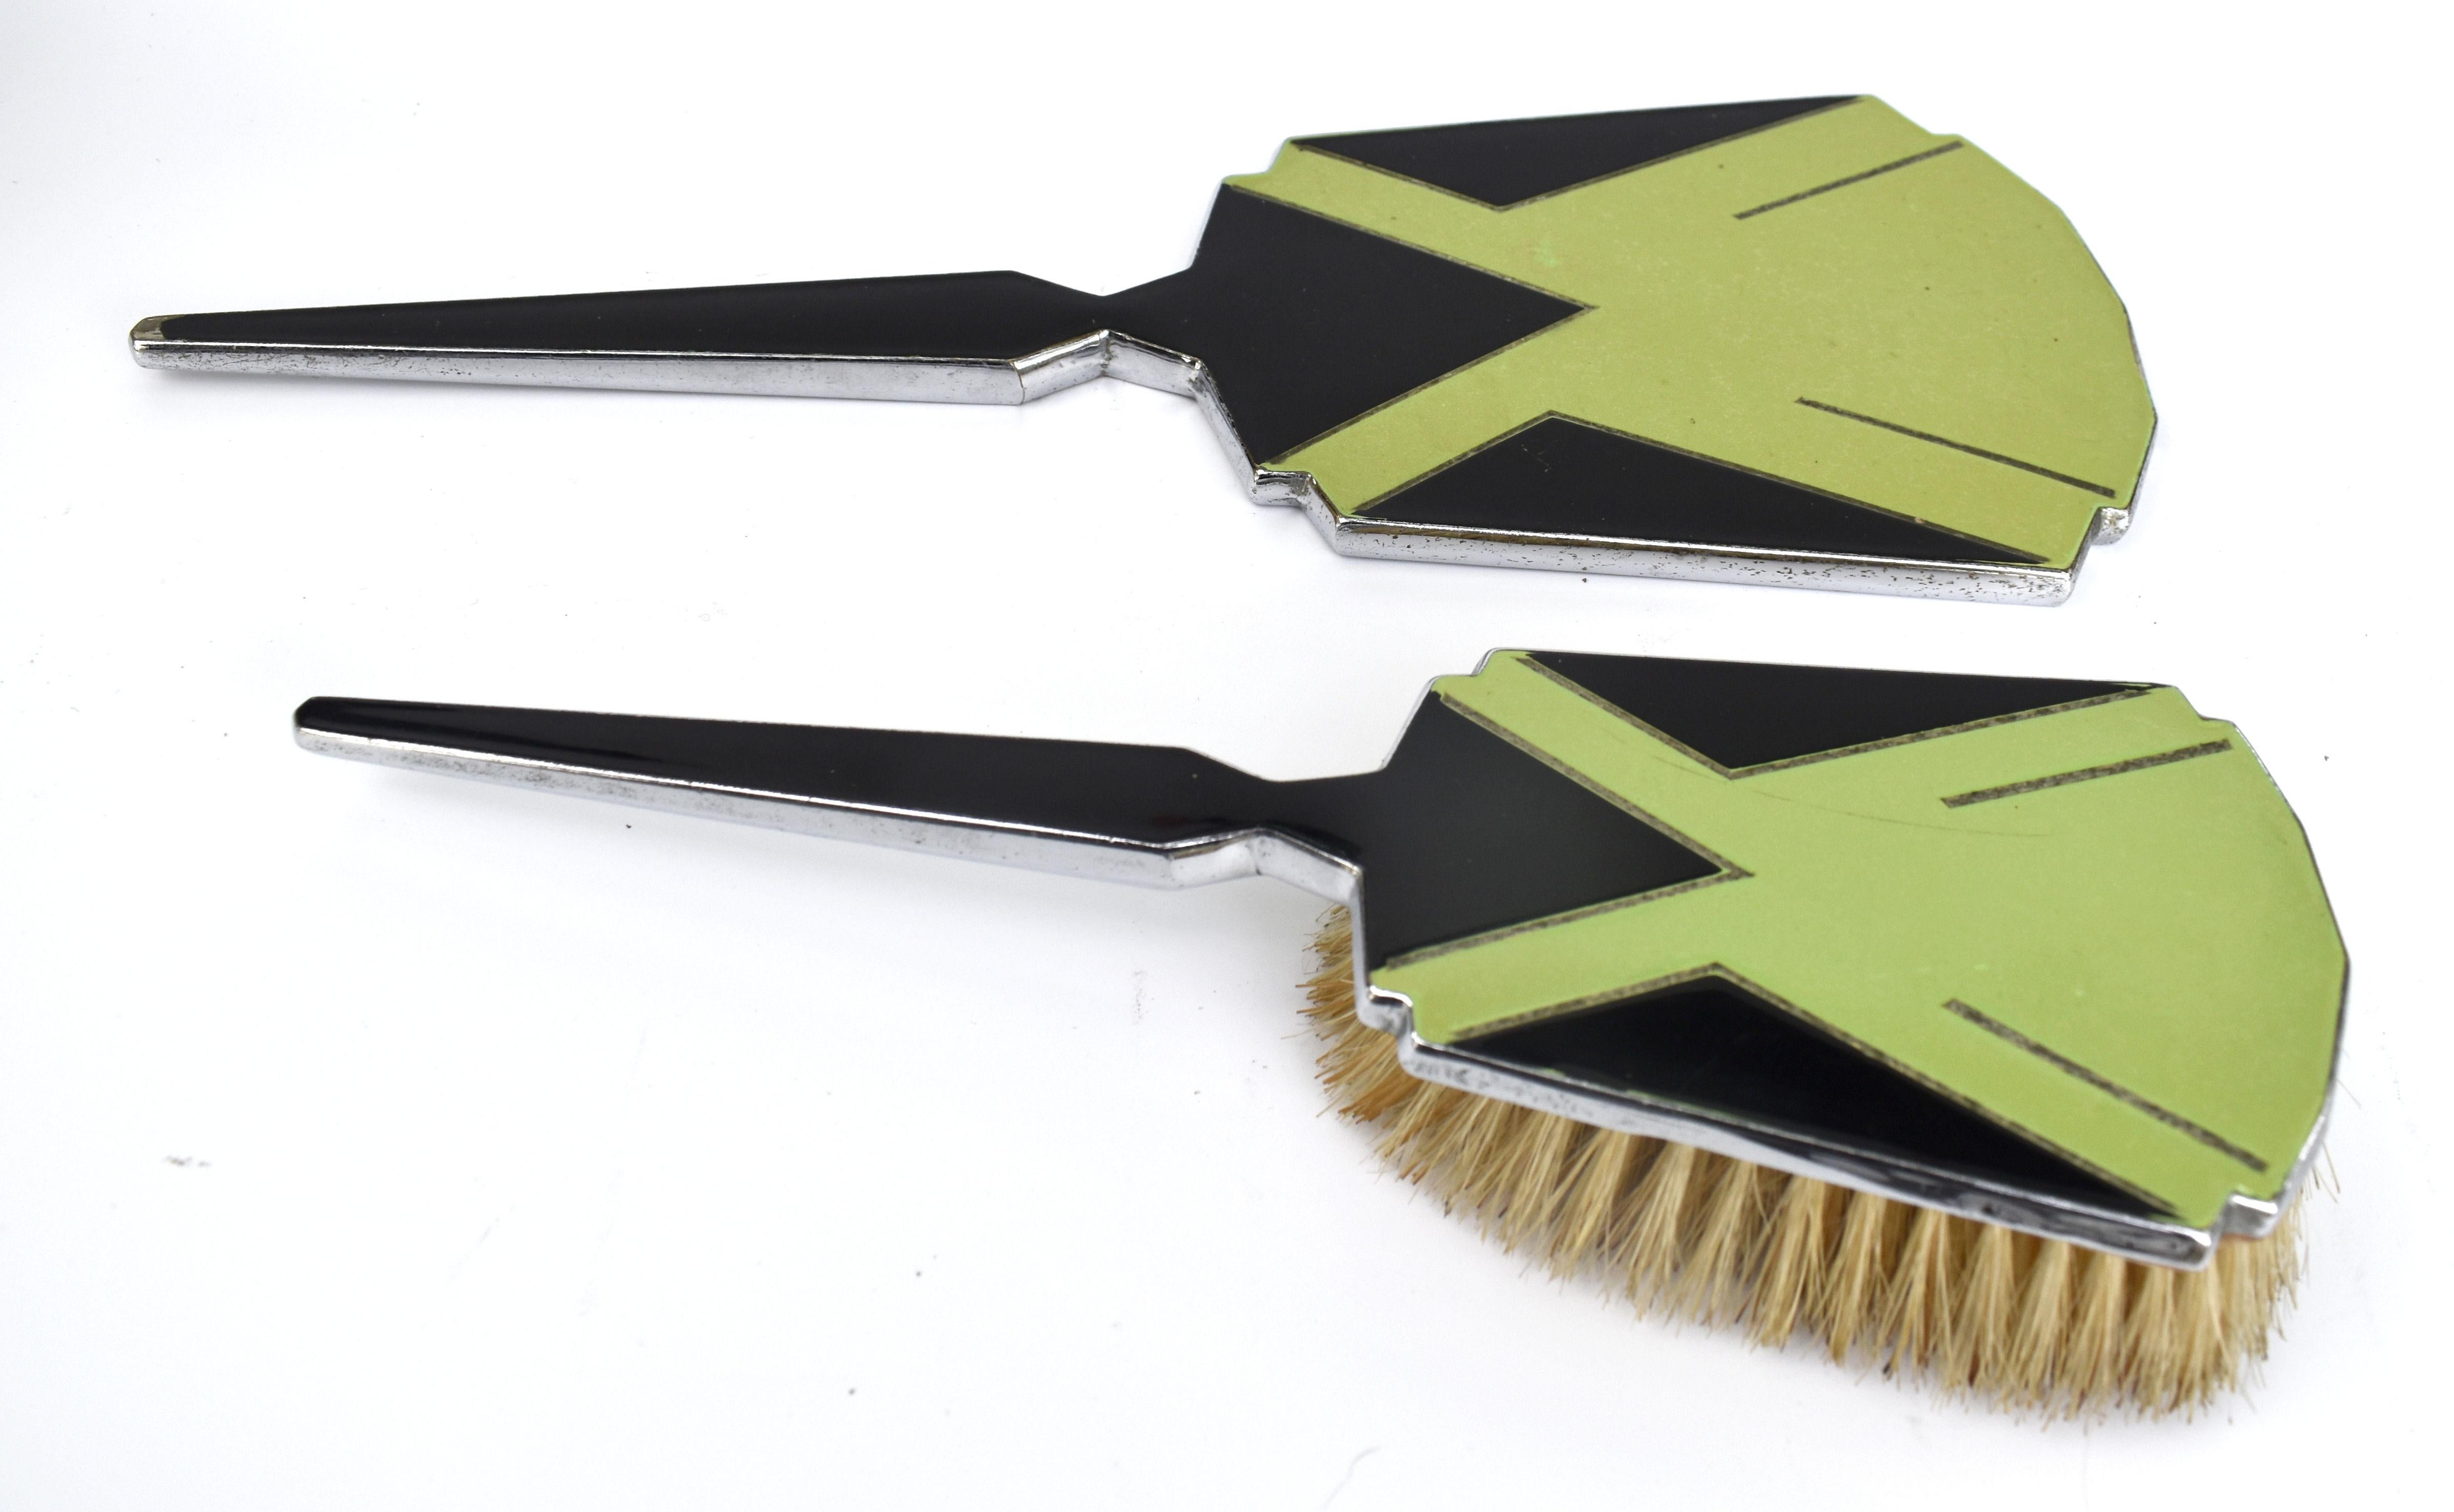 Fabulous Art Deco antique enamelled chrome metal two piece dressing table set with a jazzy Art Deco design in pea green and black. The set consists of a hand mirror and hairbrush . These are perfect pieces to act as props for your home setting, as